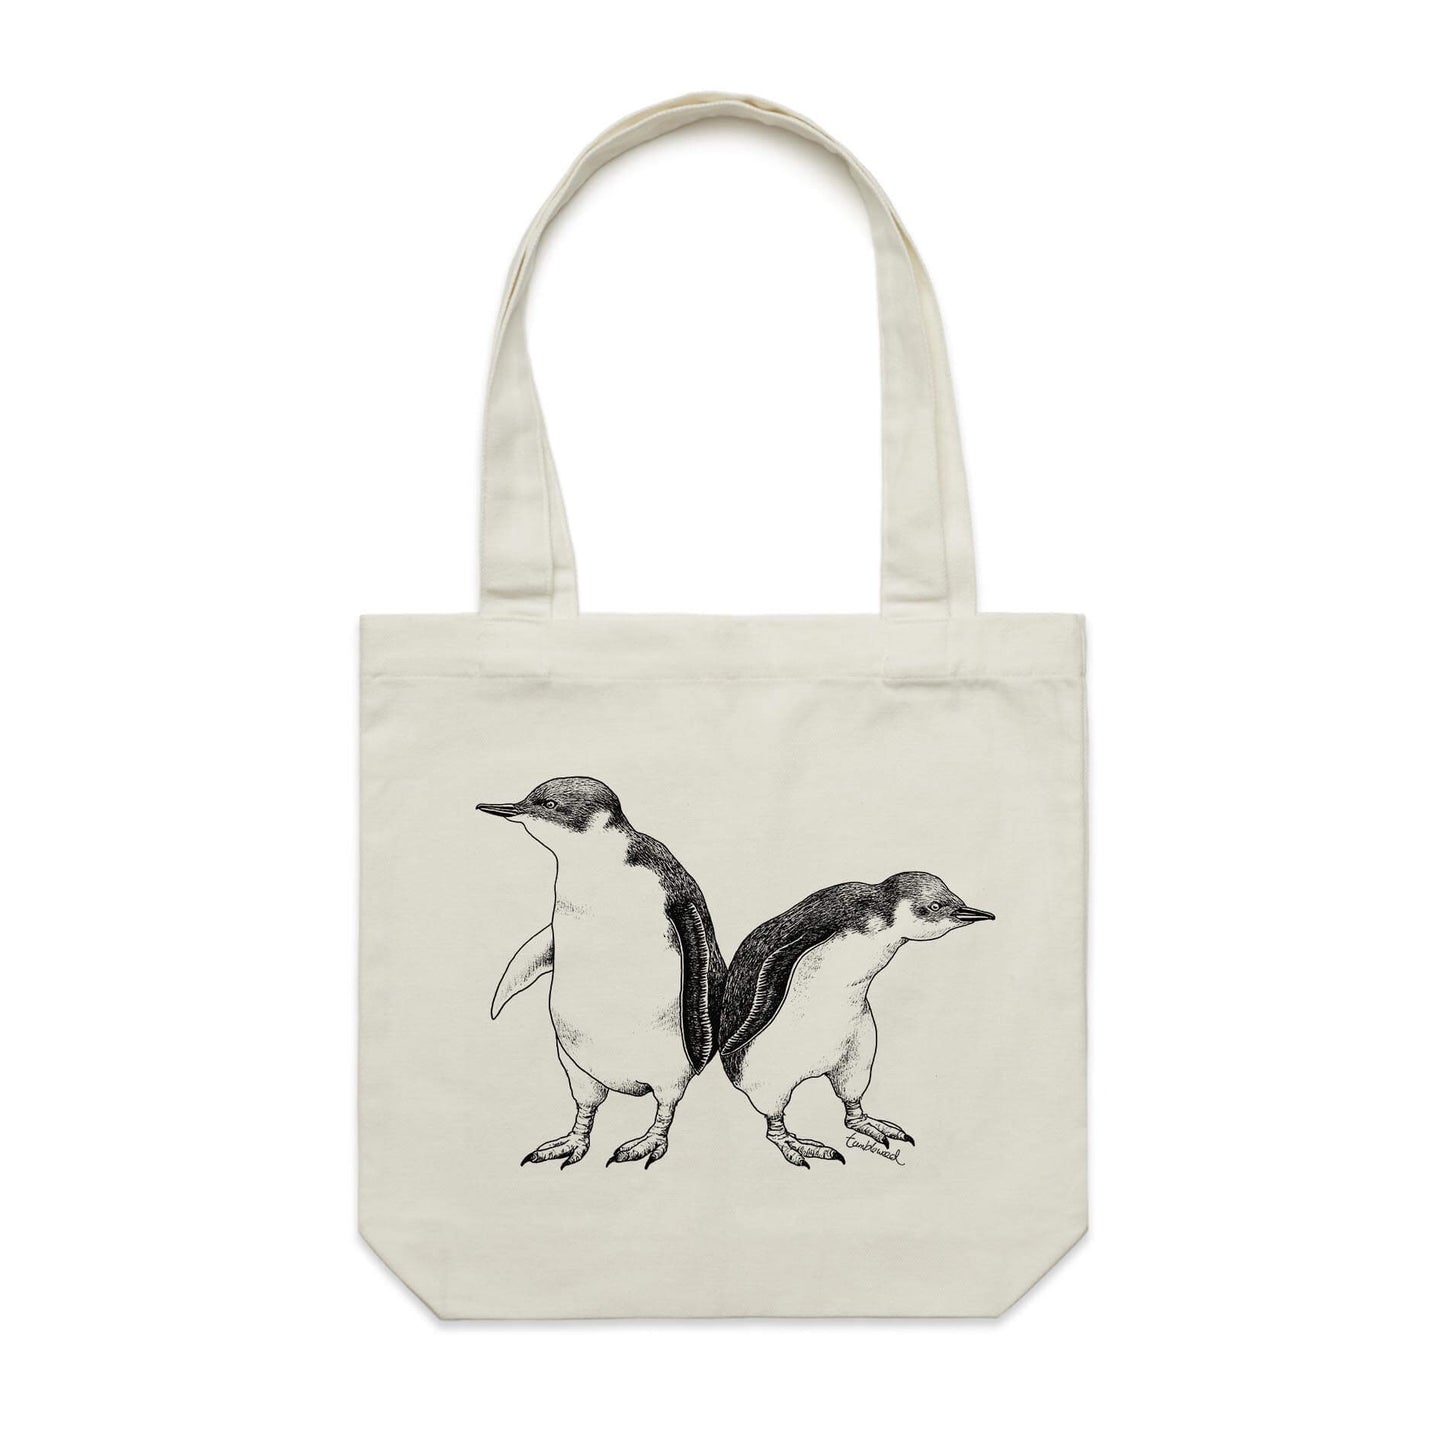 Cotton canvas tote bag with a screen printed Little Blue Penguin design.